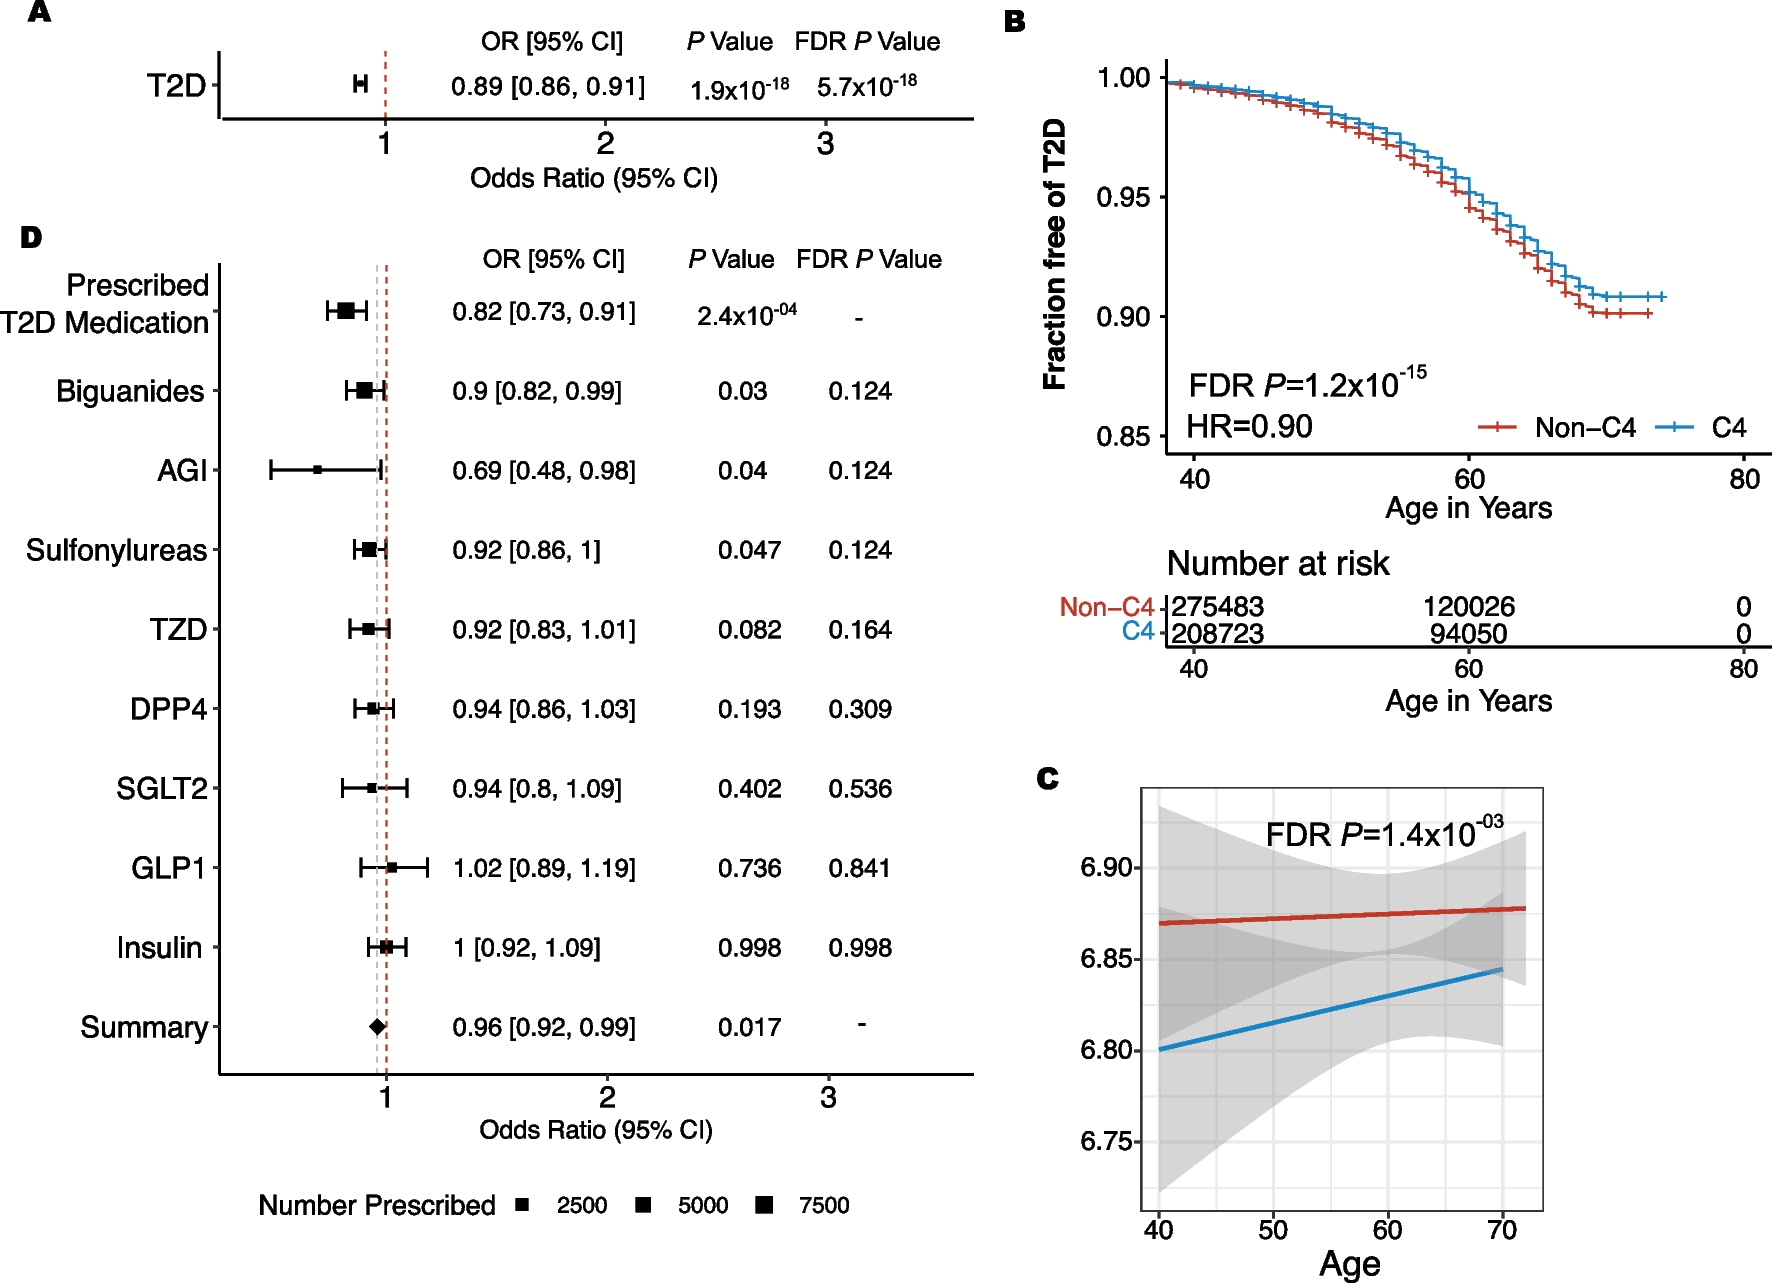 Polygenic subtype identified in ACCORD trial displays a favorable type 2 diabetes phenotype in the UKBiobank population